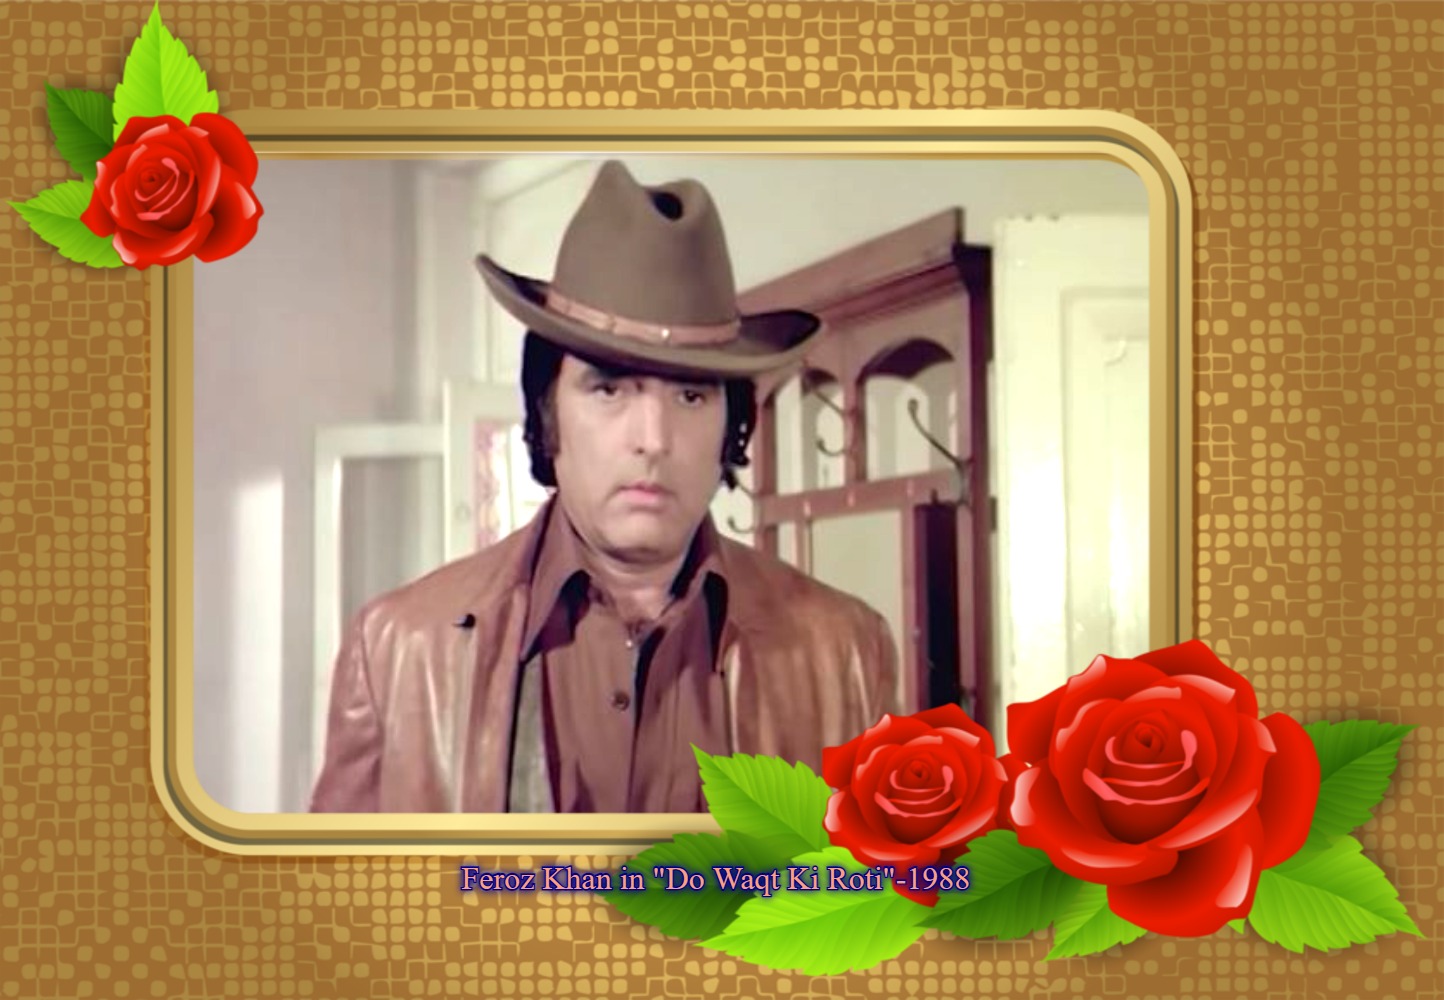 You are currently viewing “Client Eastwood of Bollywood -Dashing Feroz Khan”.